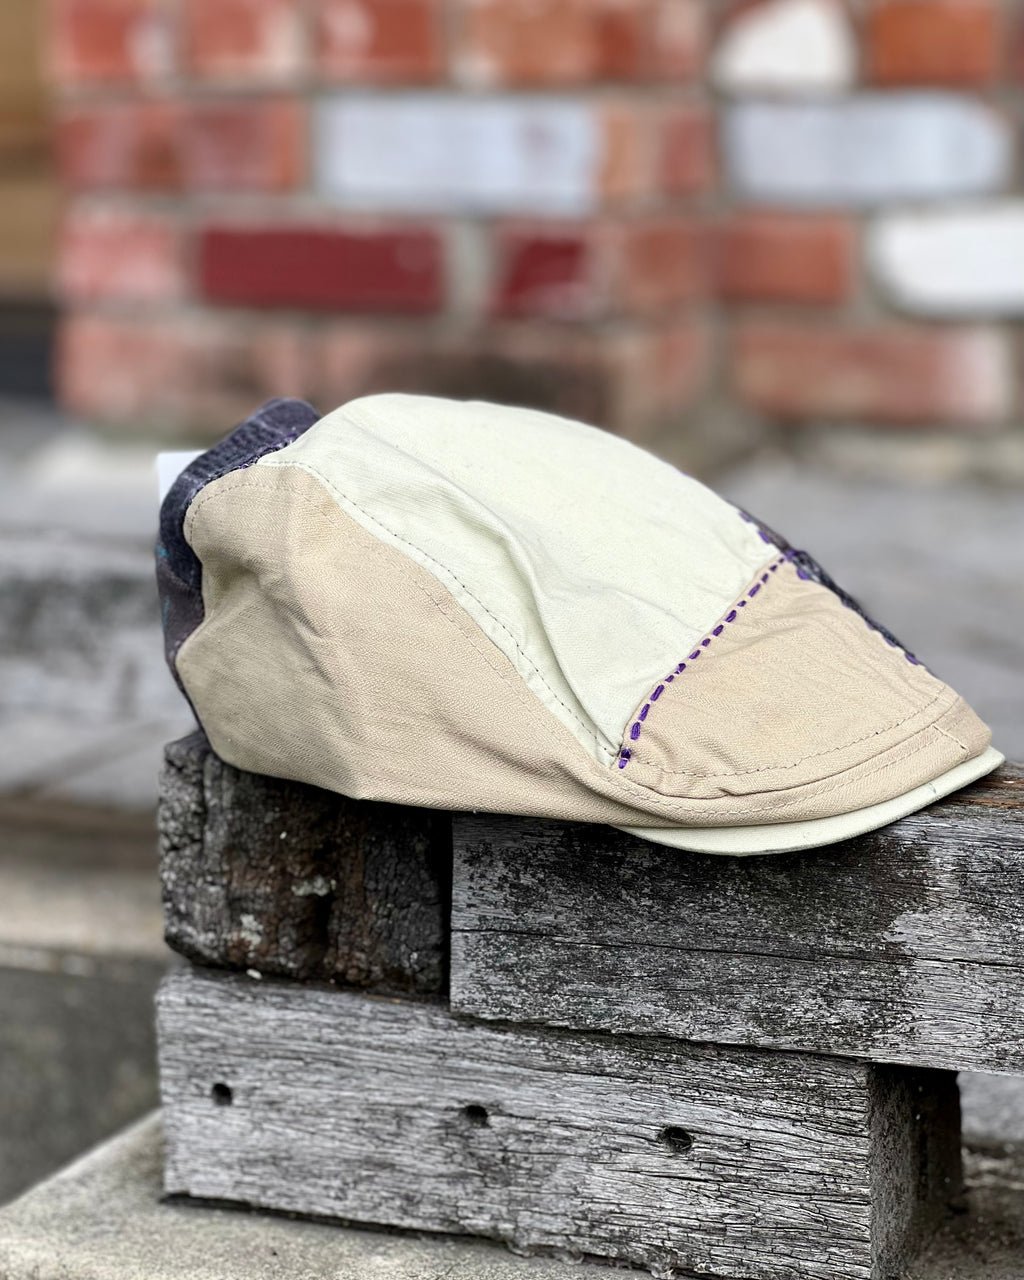 Cheesecutter cap with patched stitching in wool and cotton by Electric Pukeko